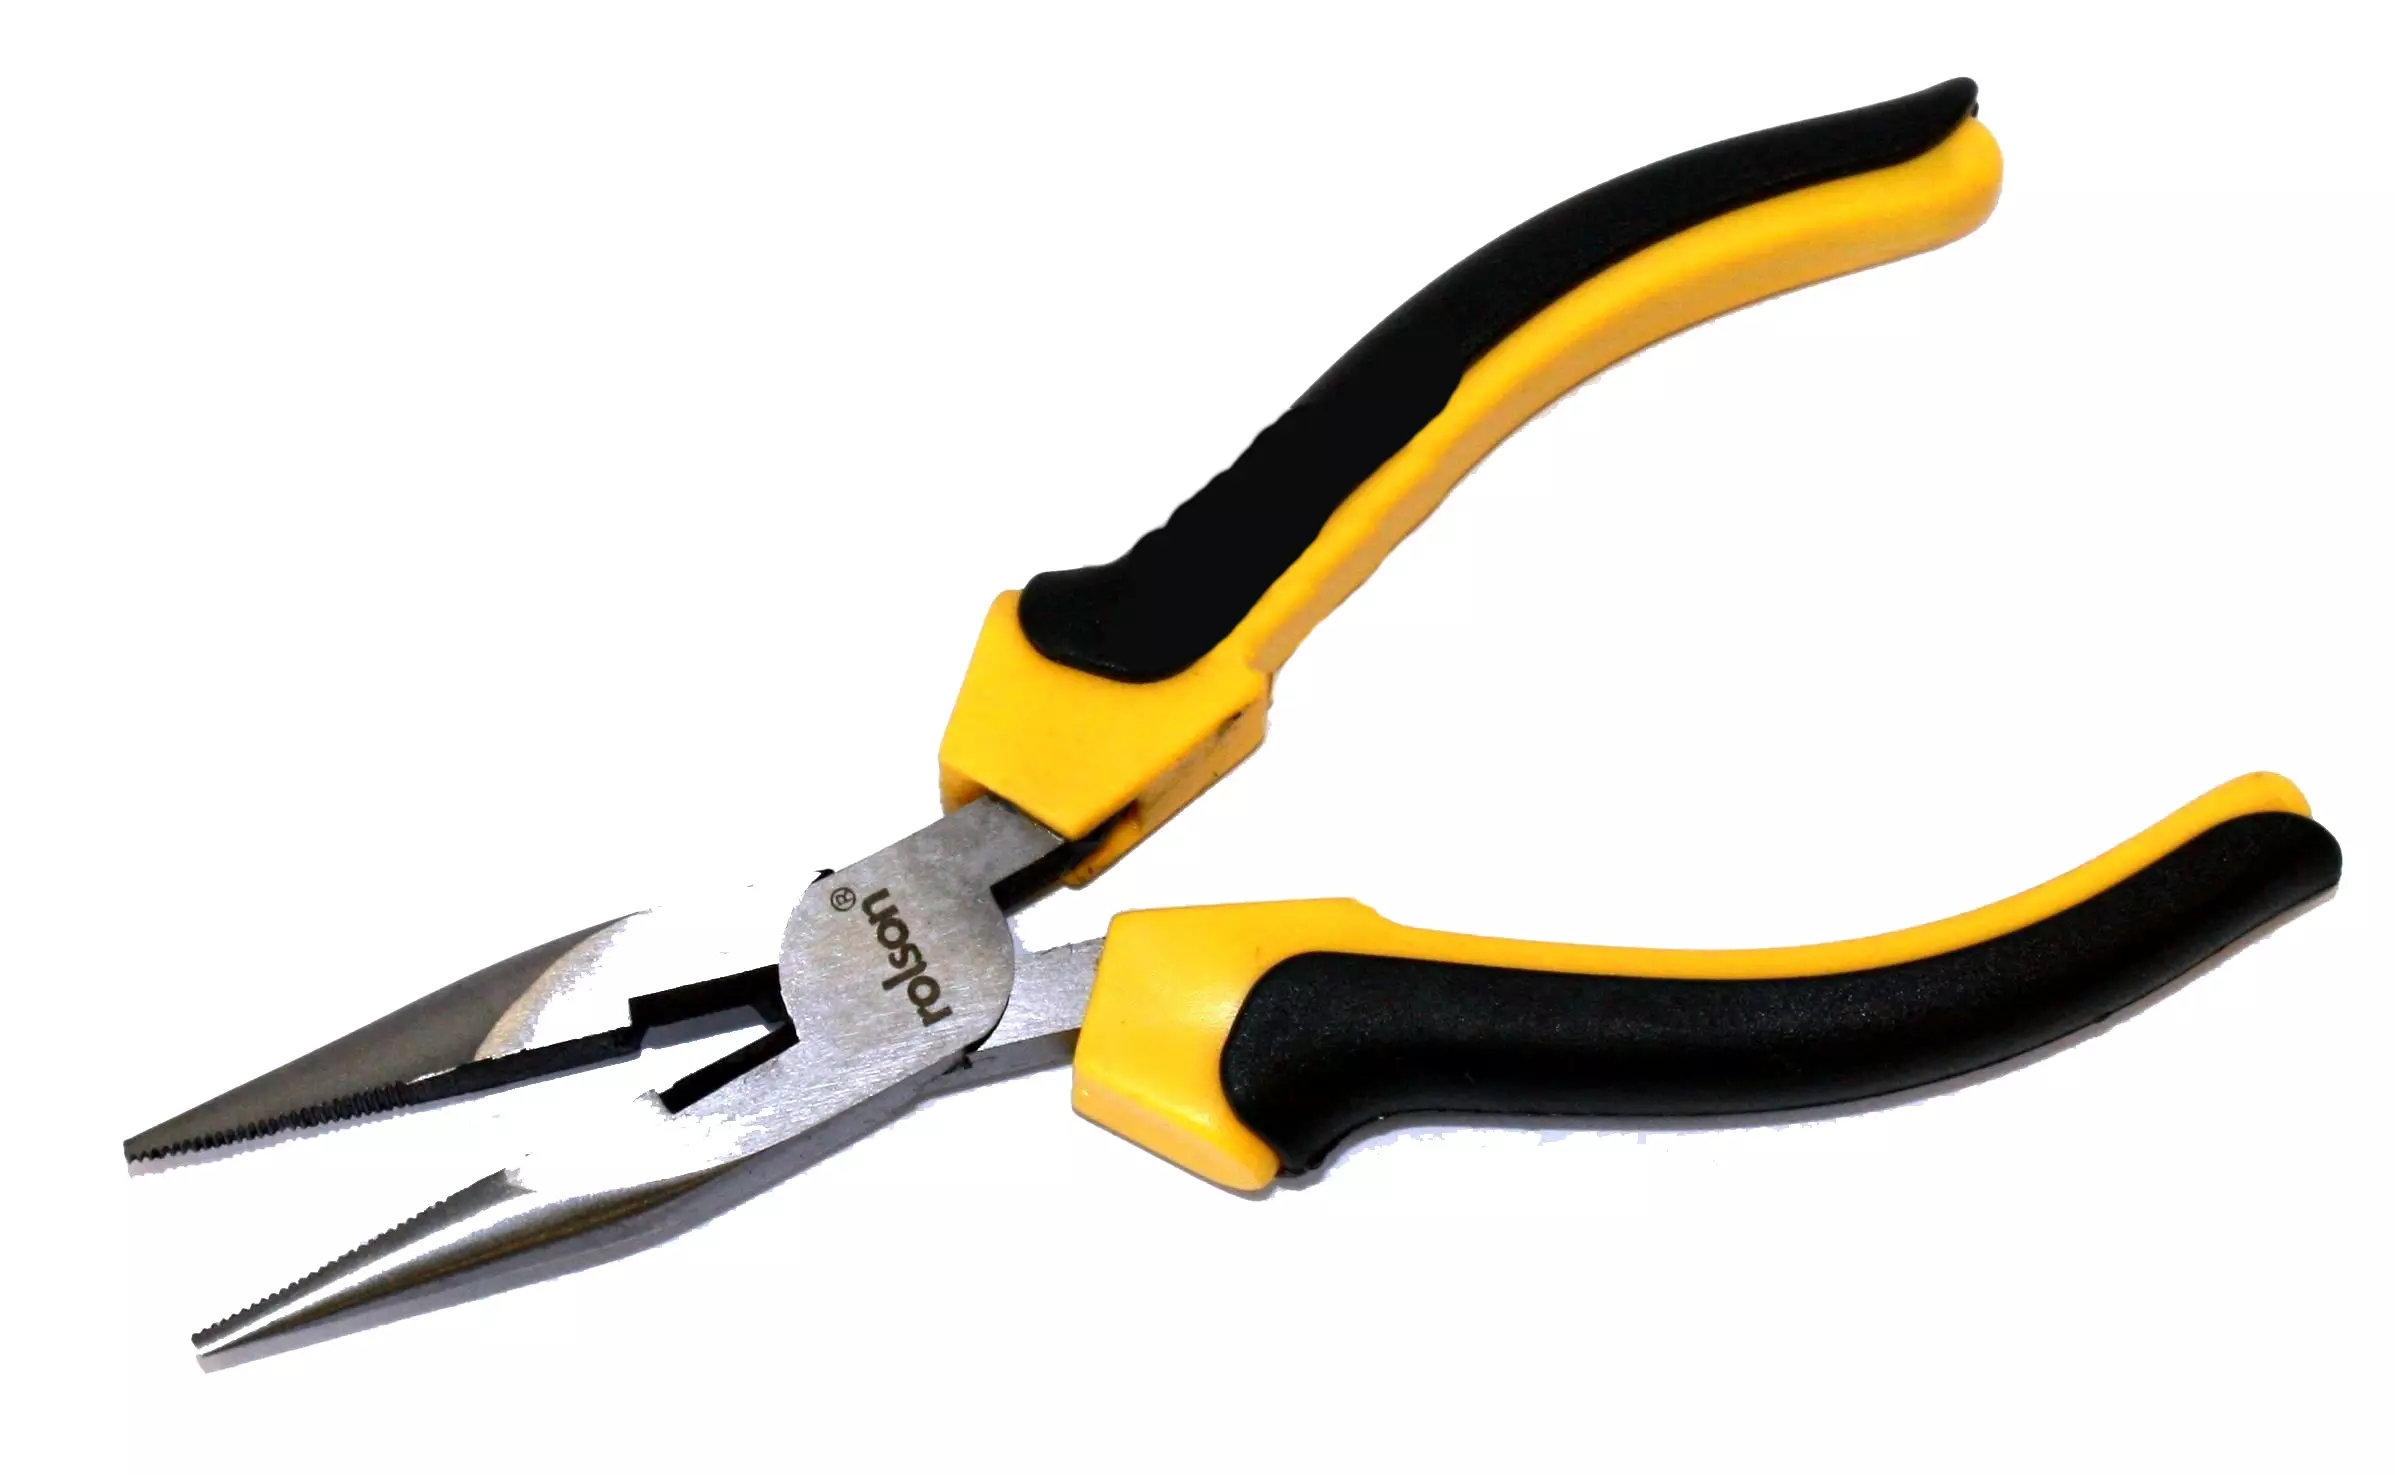 pliers uses